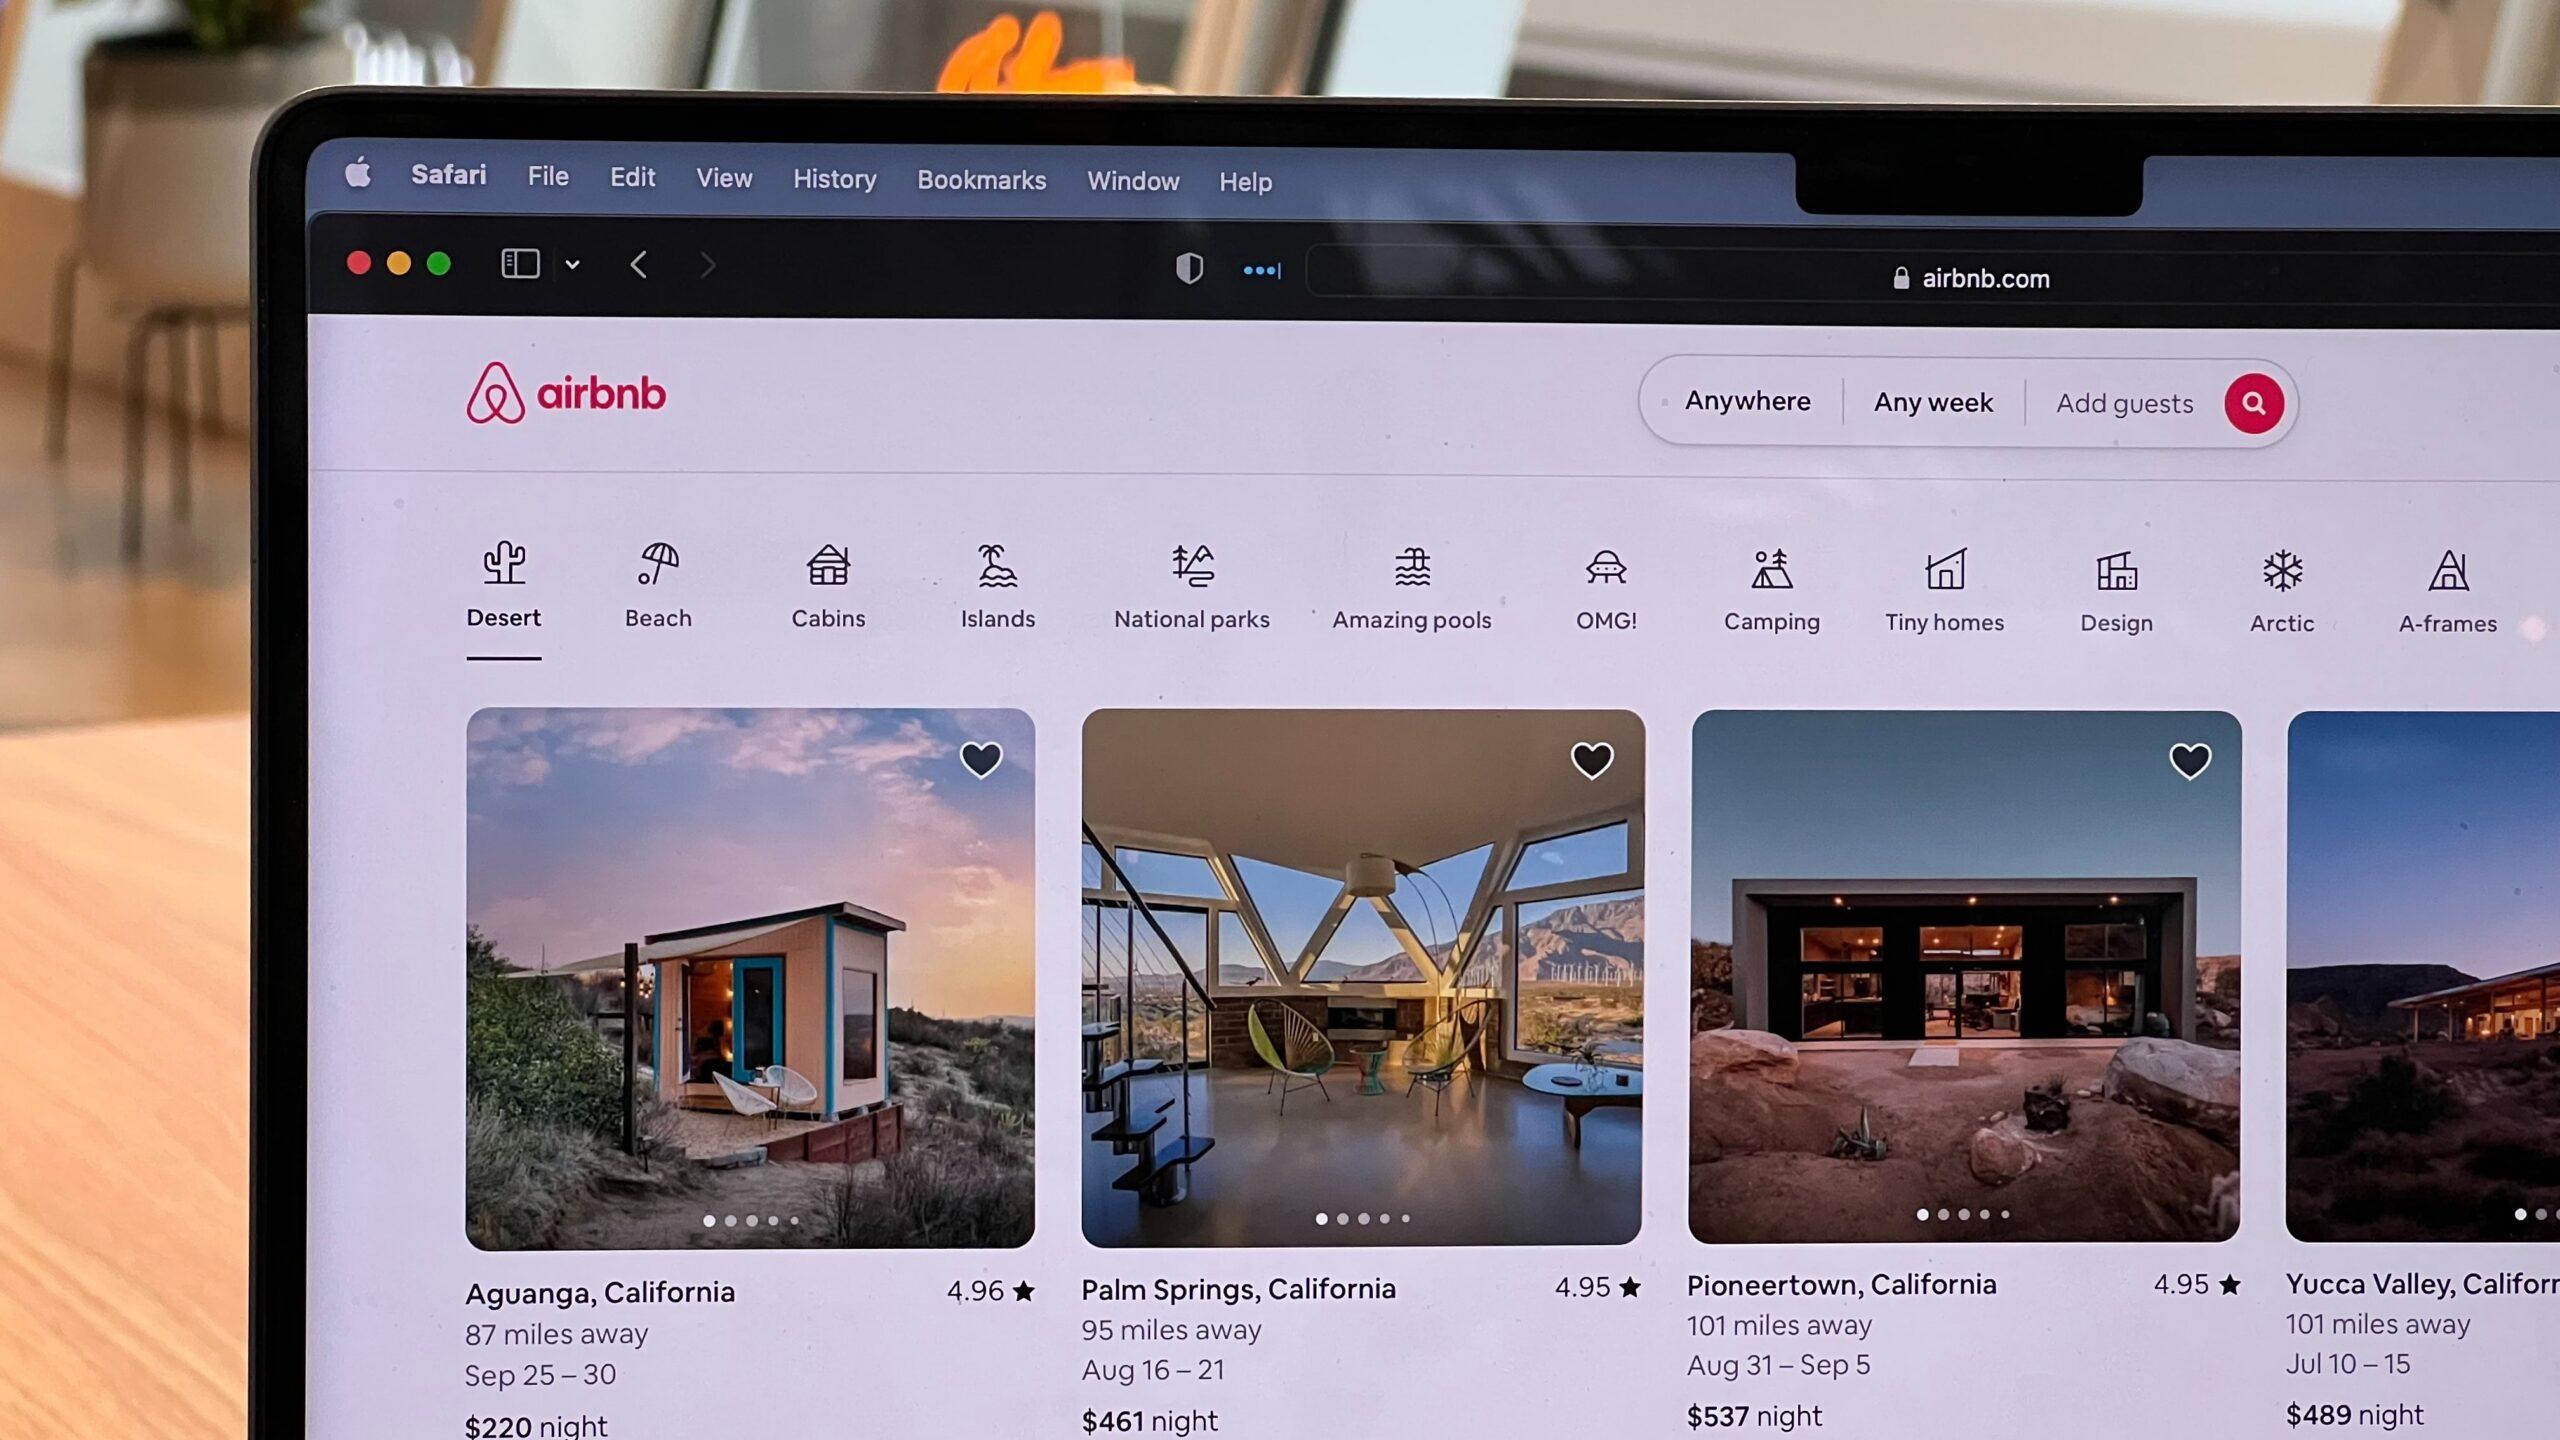 Airbnb website displayed on a laptop screen.